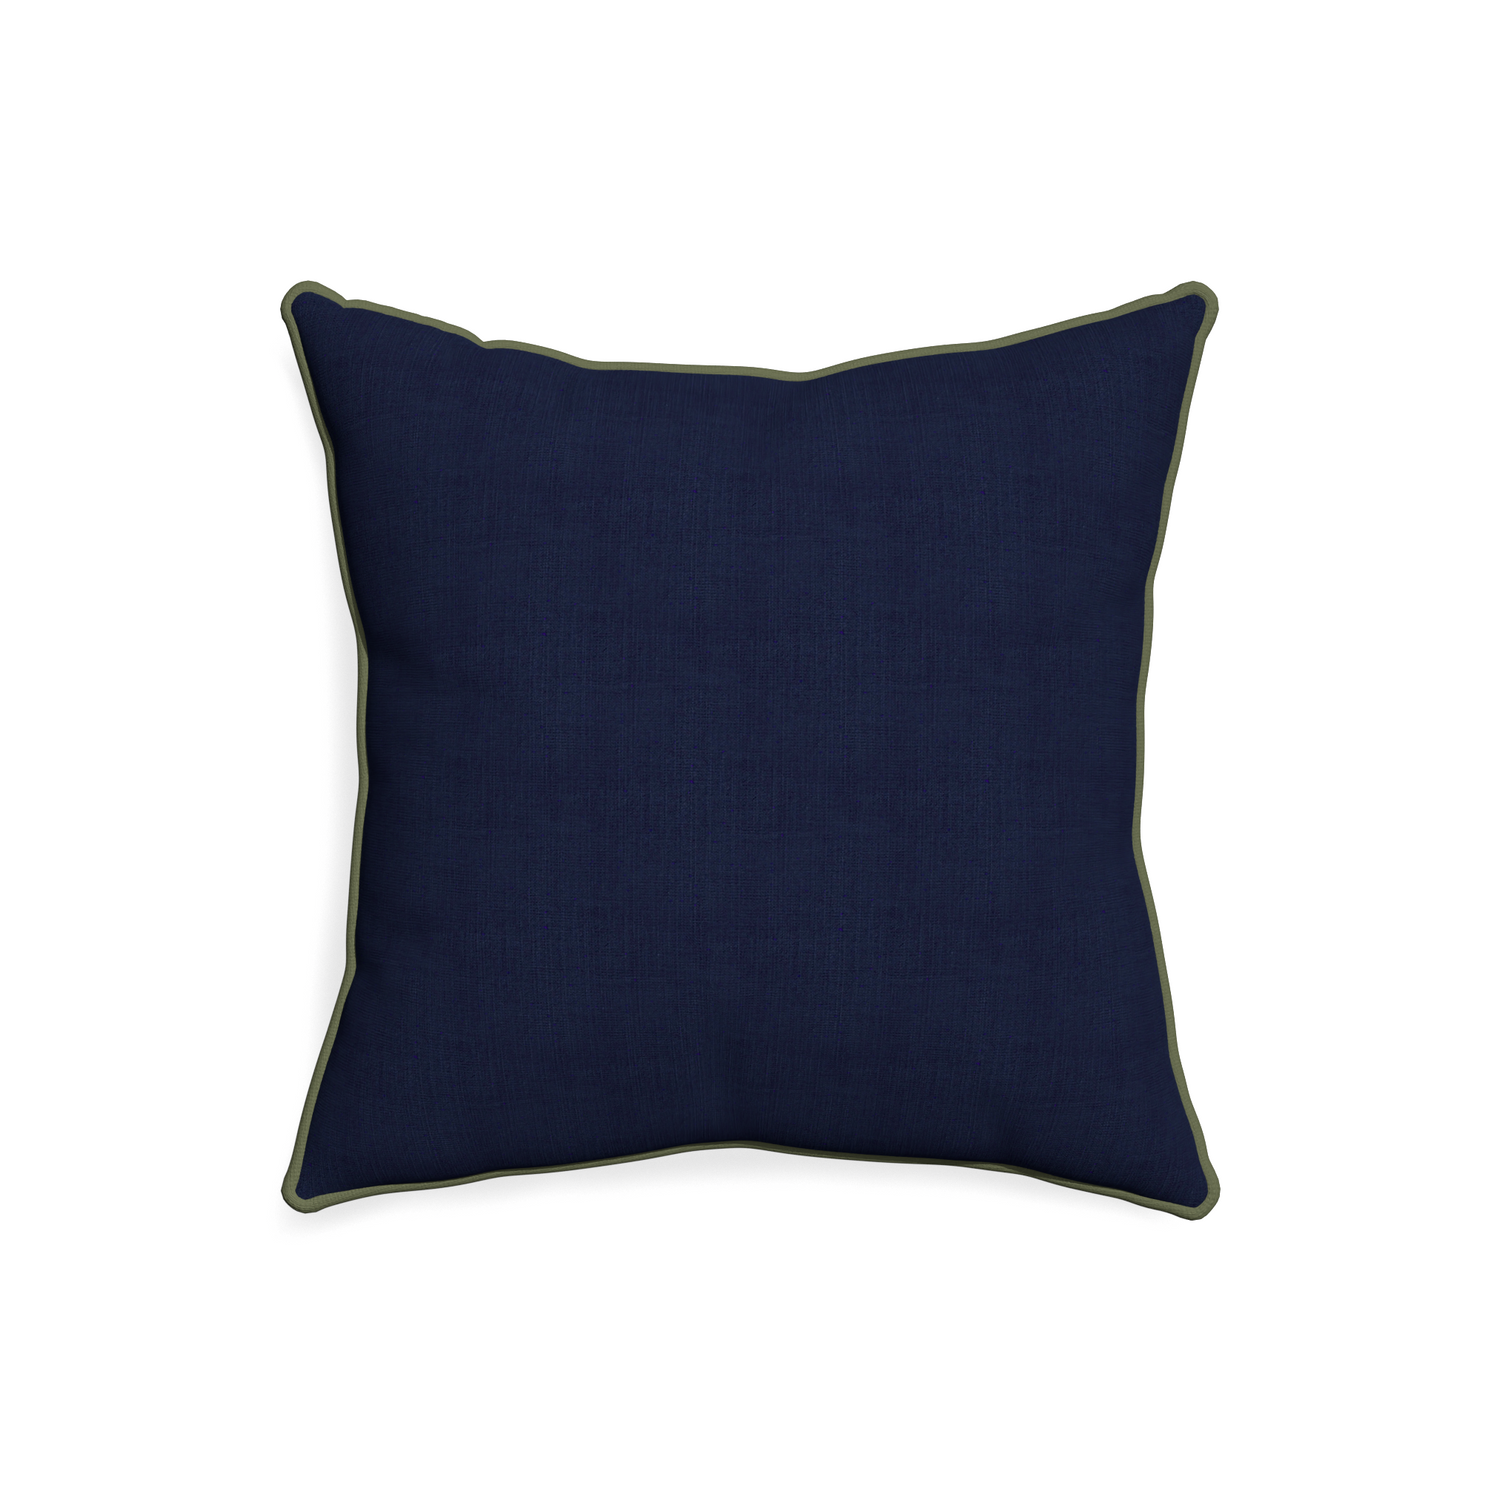 20-square midnight custom pillow with f piping on white background